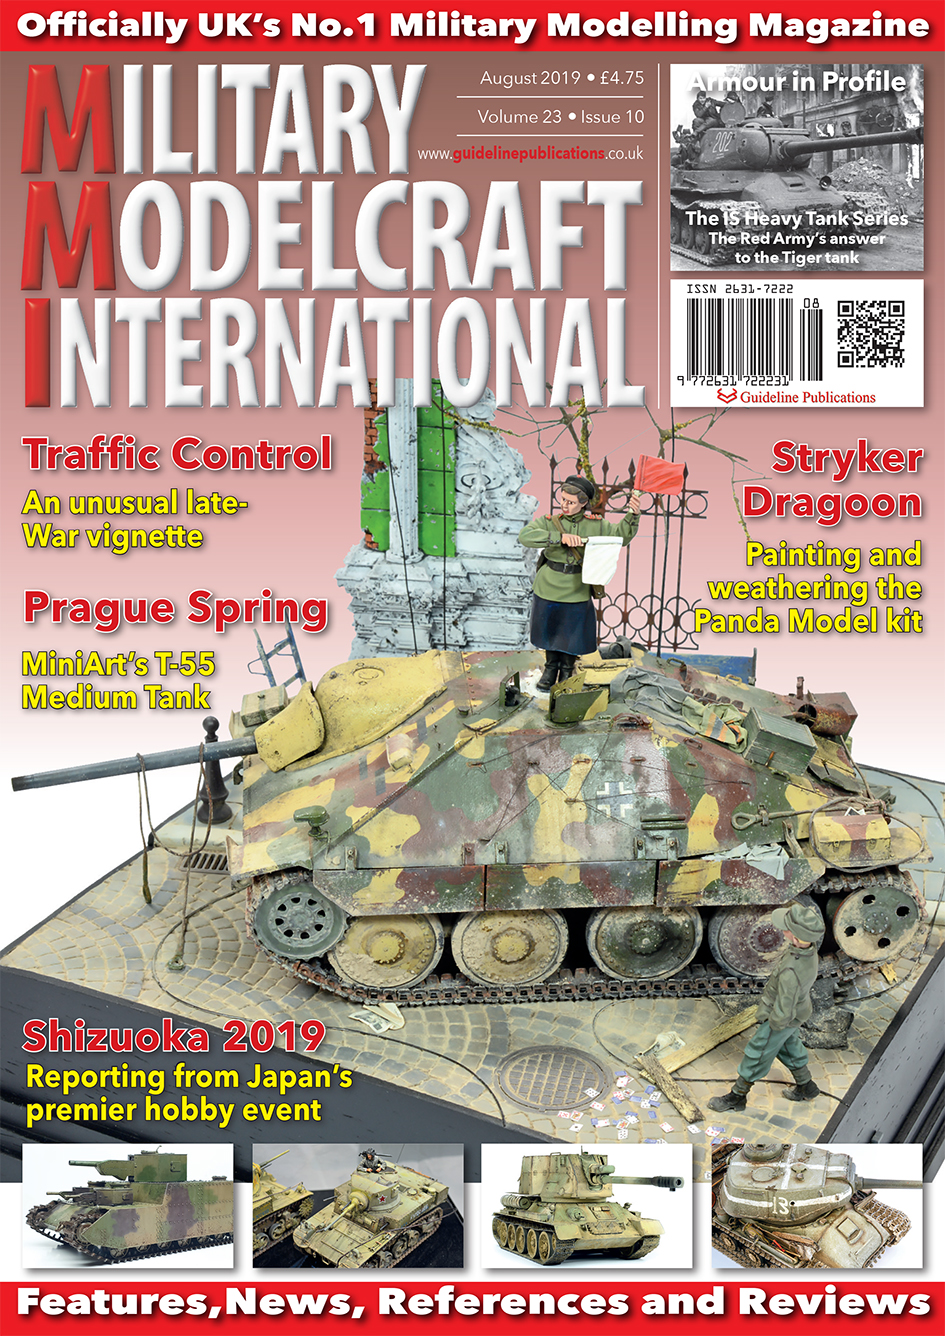 Guideline Publications Ltd Military Modelcraft Int August 2019 vol 23-10 - August  2019 